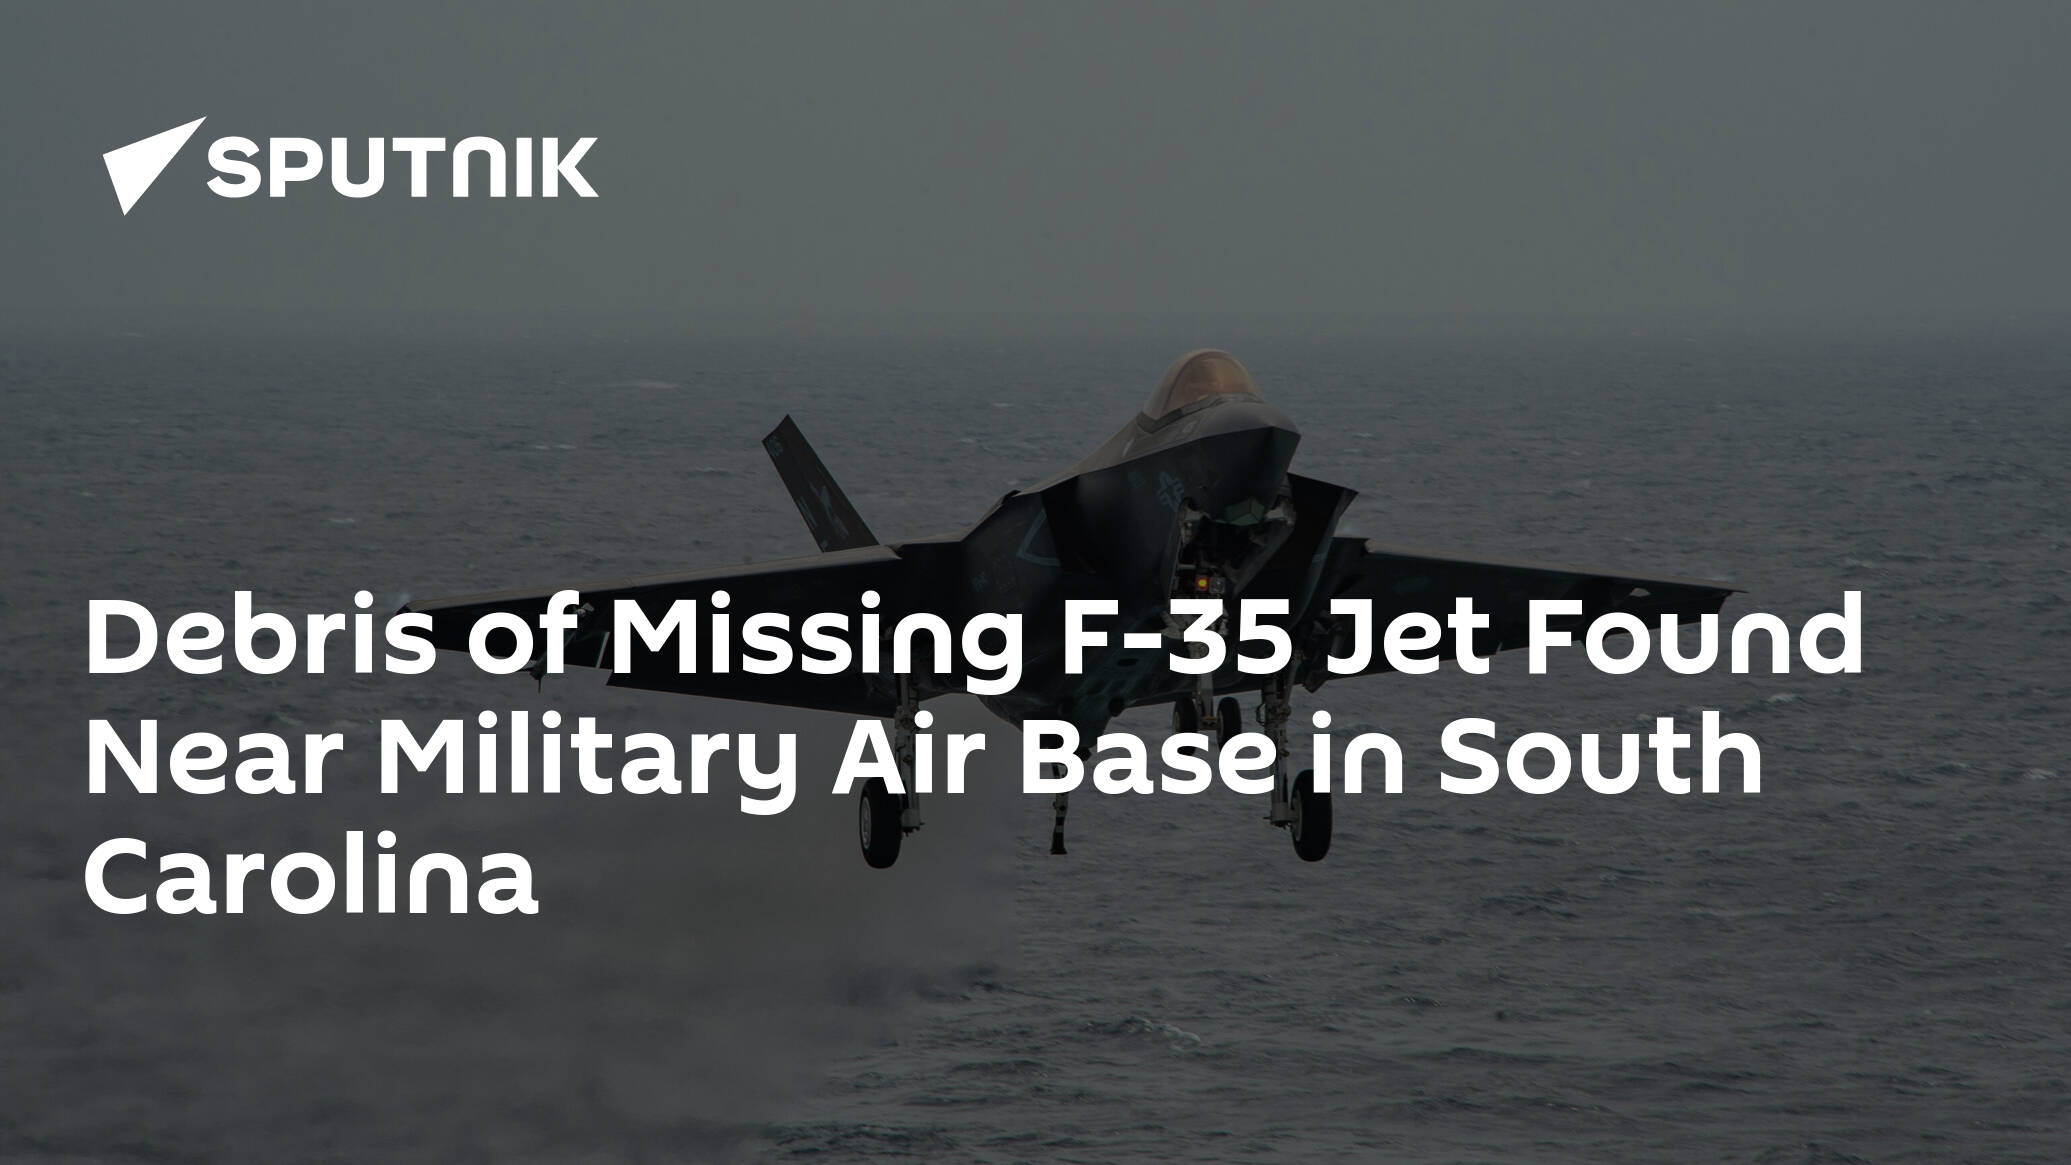 Debris of Missing F-35 Jet Found Near Military Air Base in South Carolina